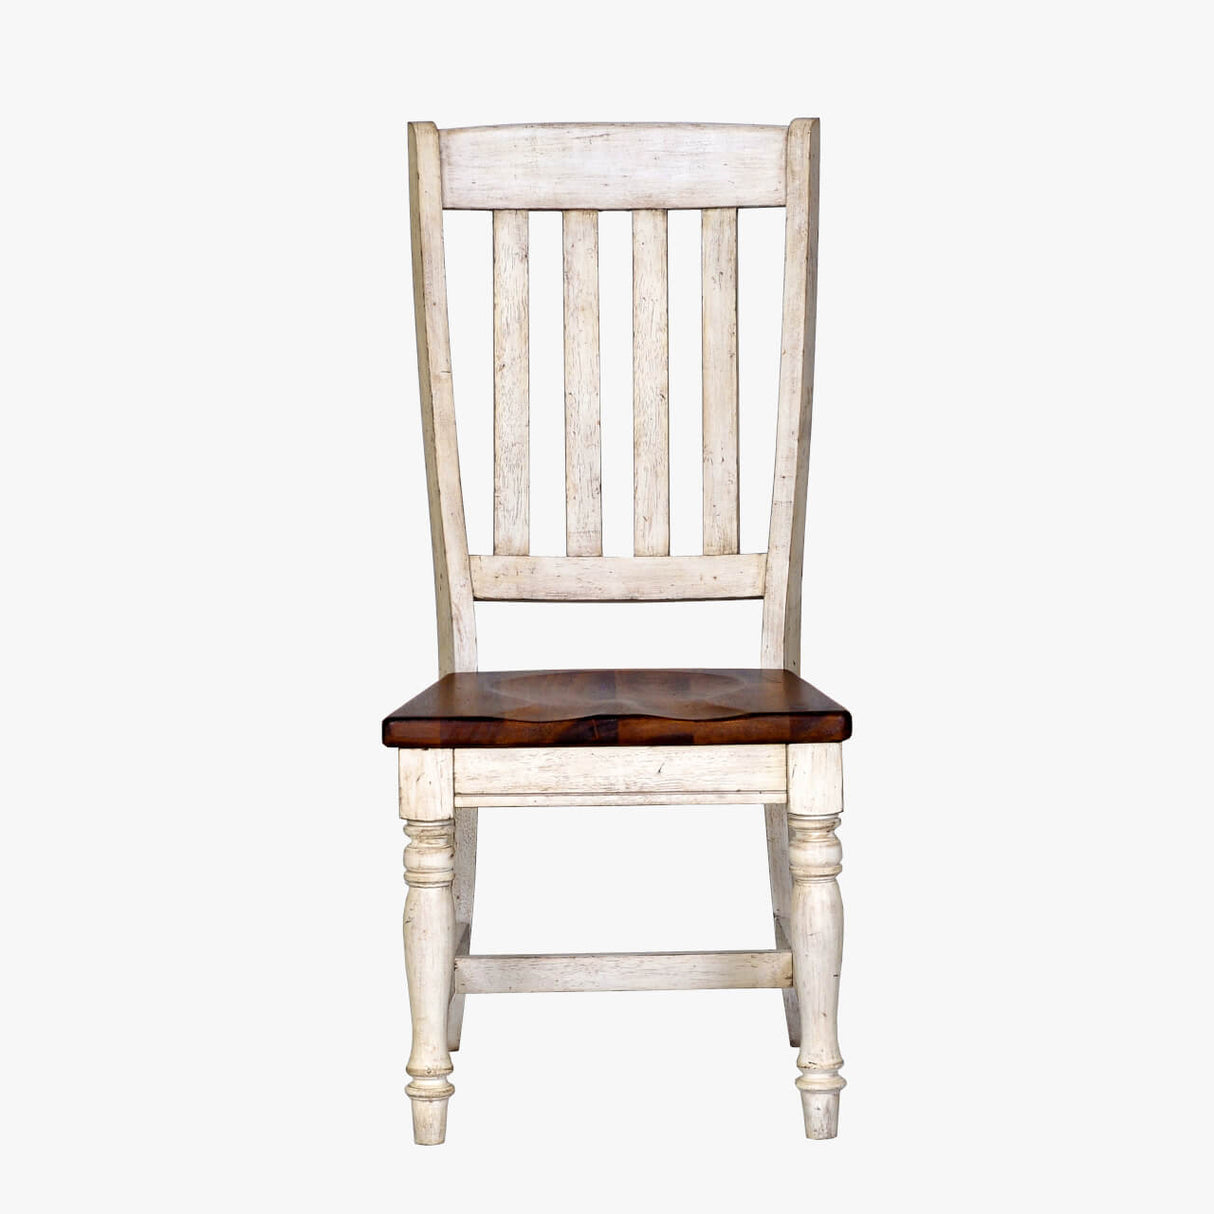 Belmont Dining Chair